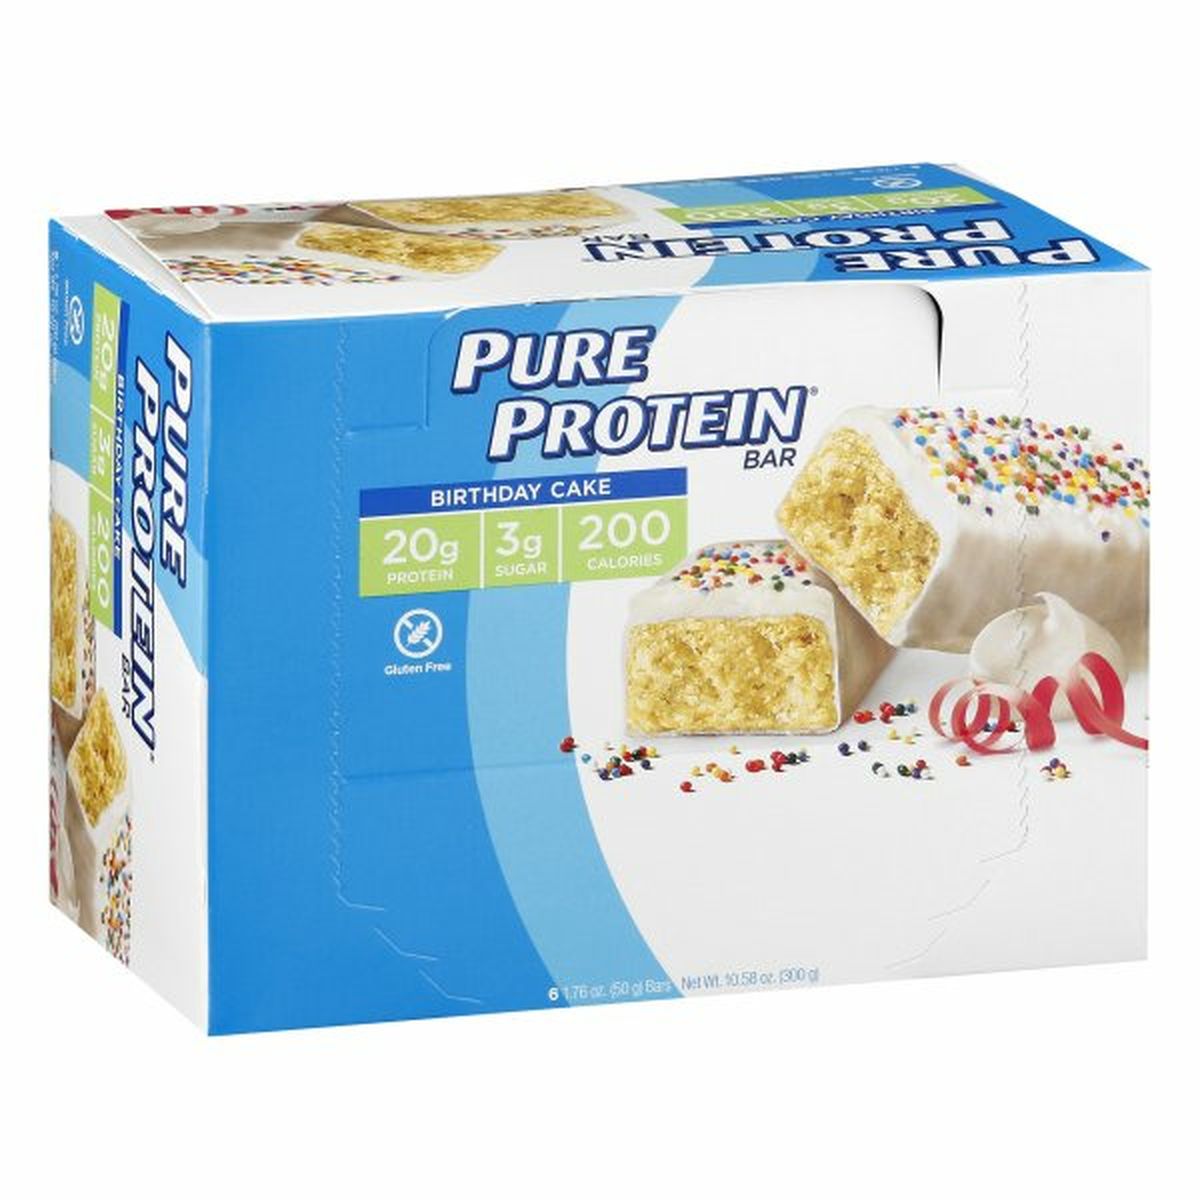 Calories in Pure Protein Bar, Birthday Cake